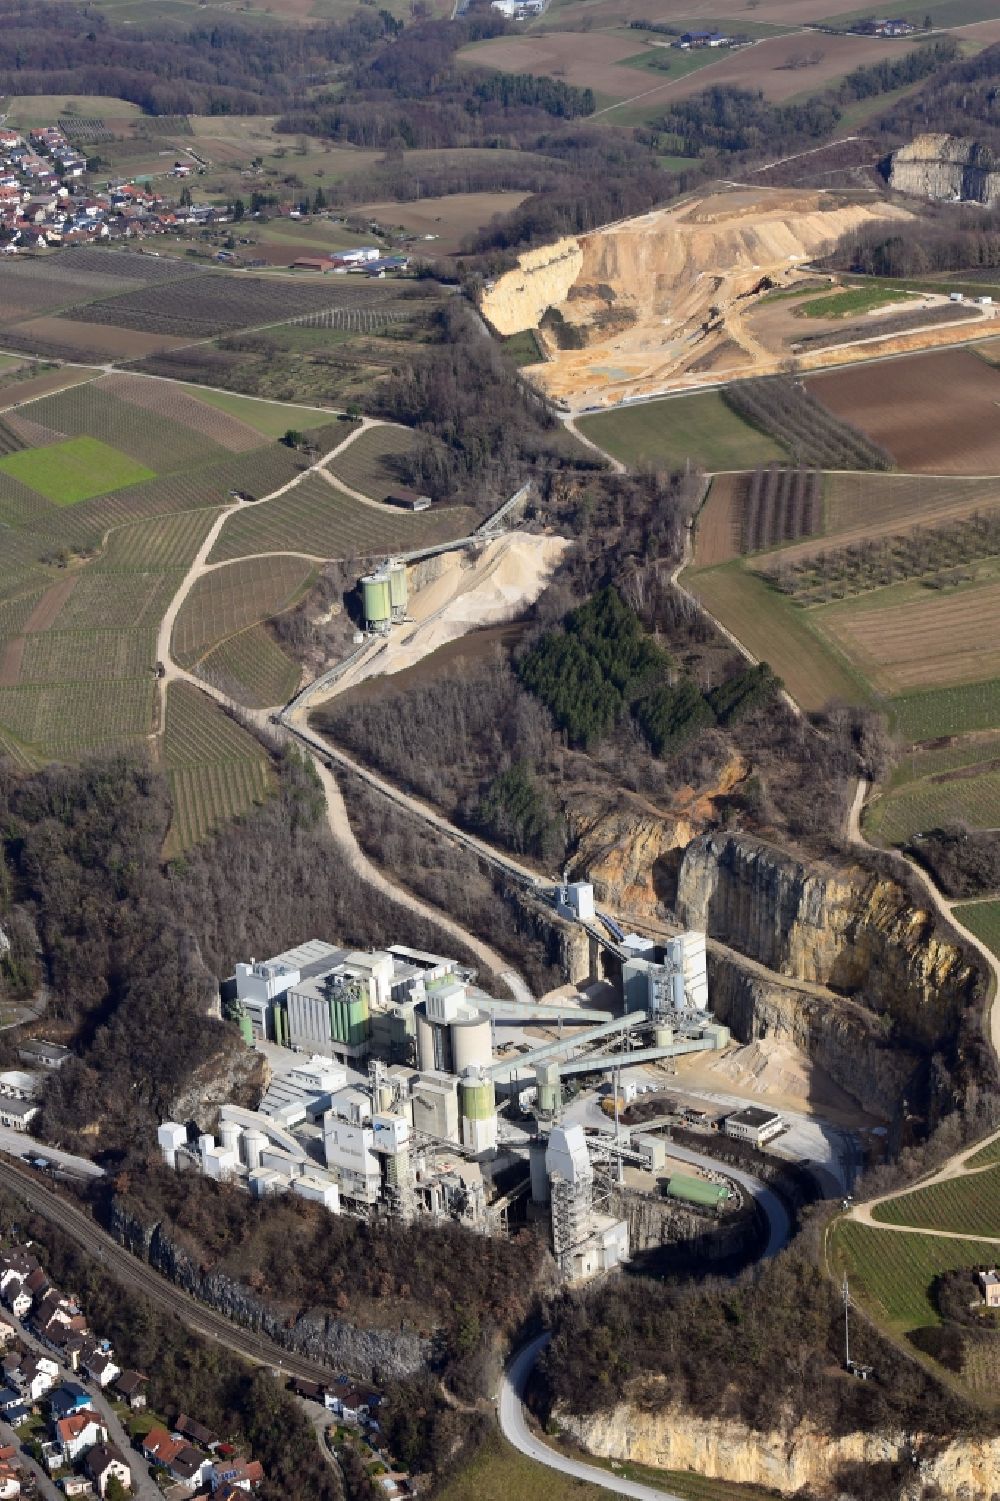 Efringen-Kirchen from above - Company grounds and facilities of Lhoist-Group with the limestone factory in the district Istein in Efringen-Kirchen in the state Baden-Wurttemberg, Germany